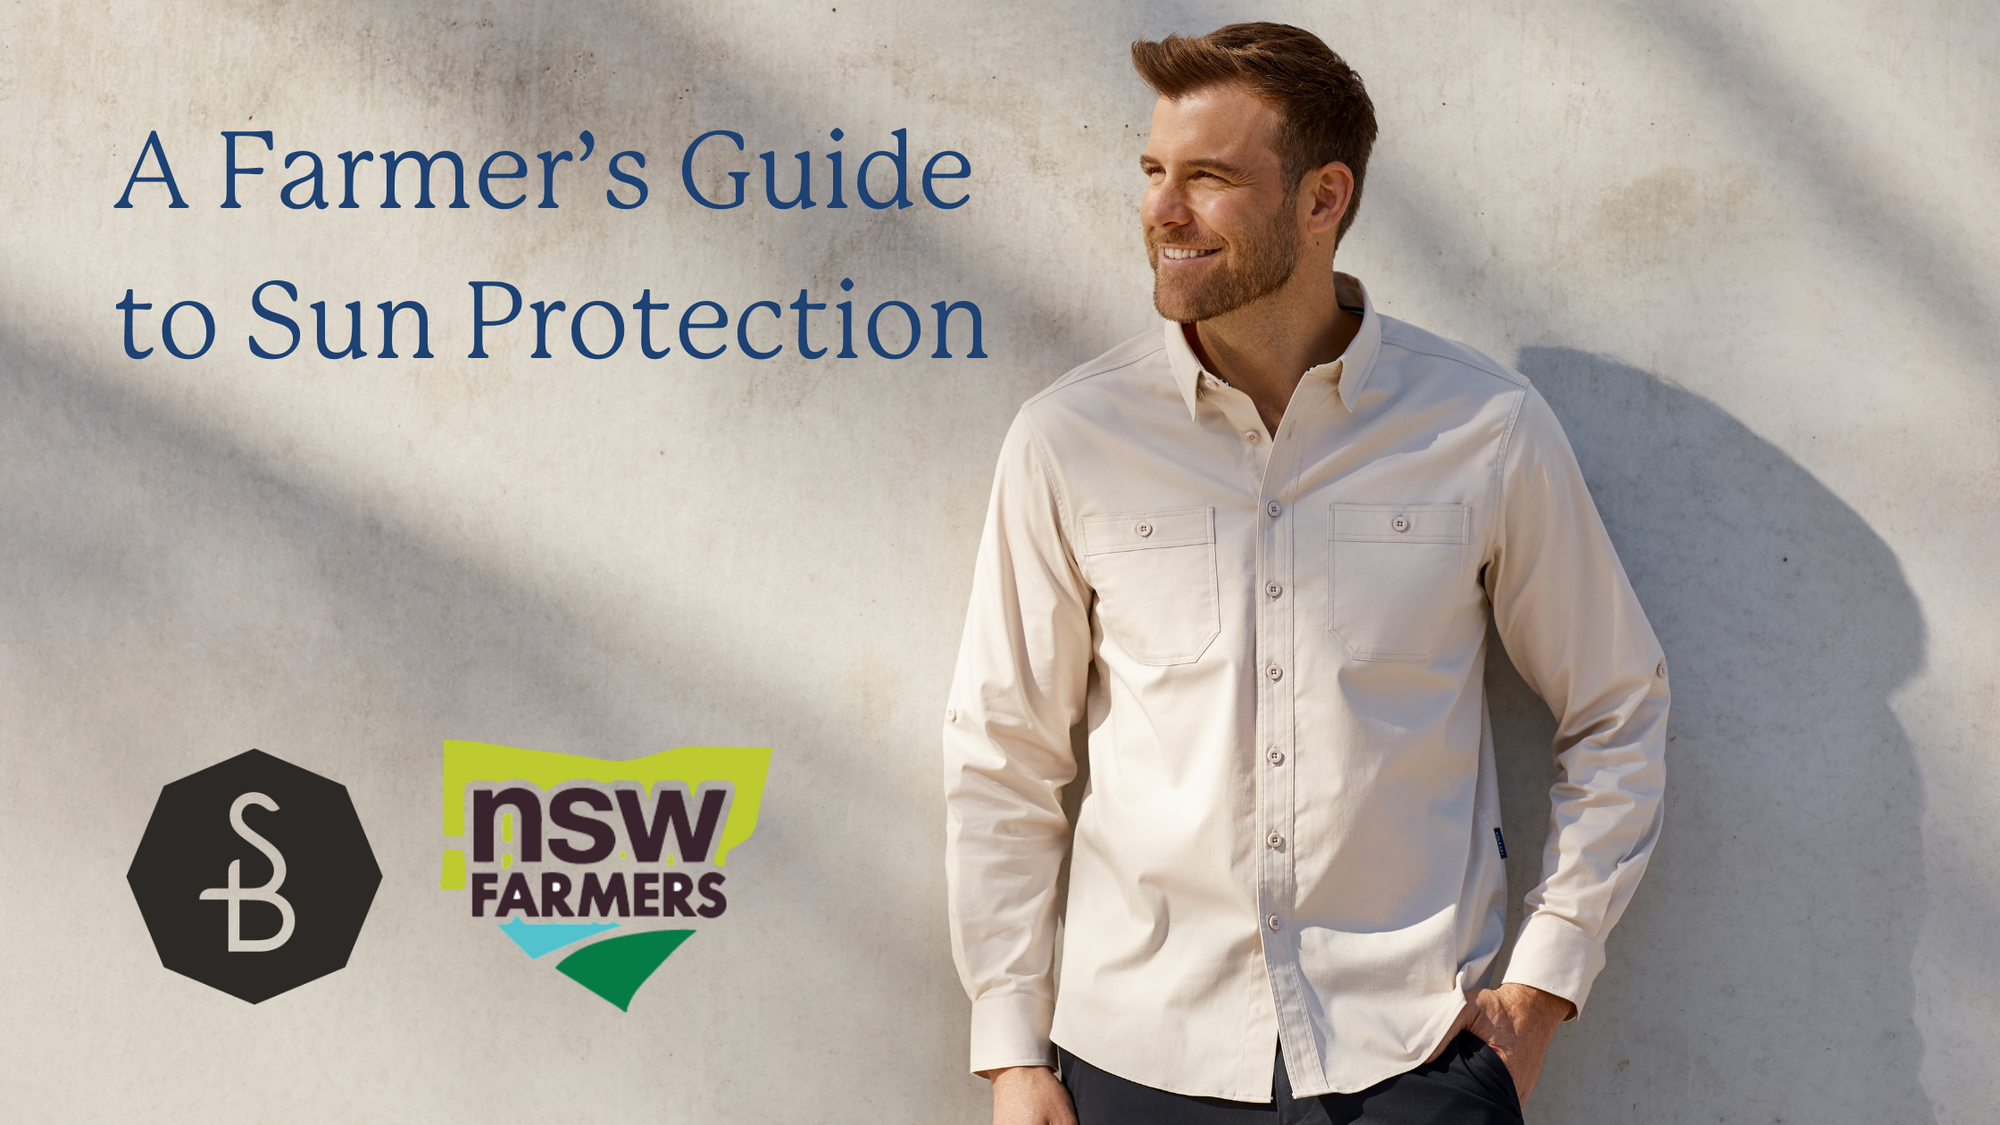 A Farmer’s Guide to Sun Protection